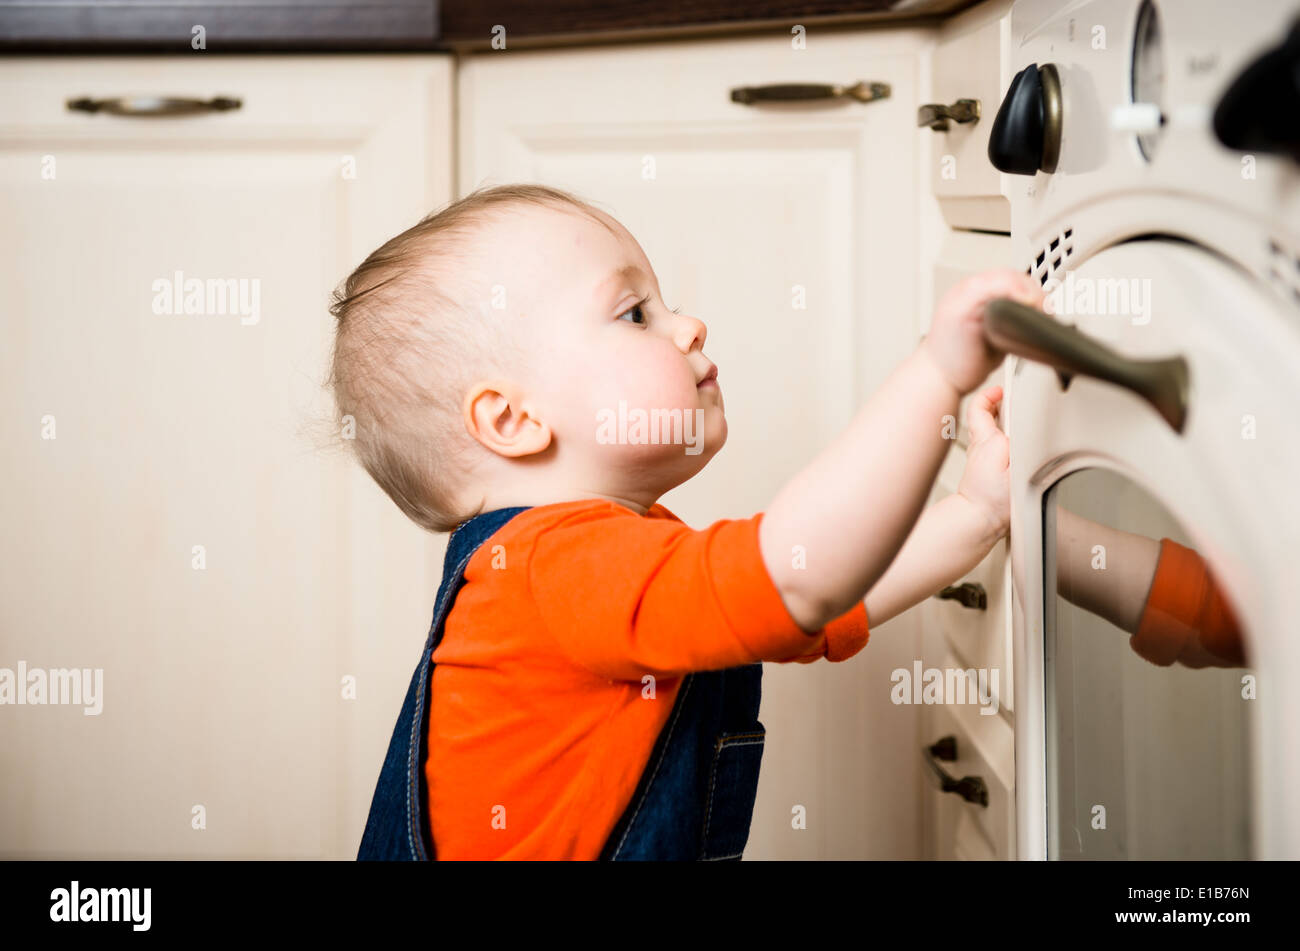 Curious baby watching through glass of kitchen oven Stock Photo